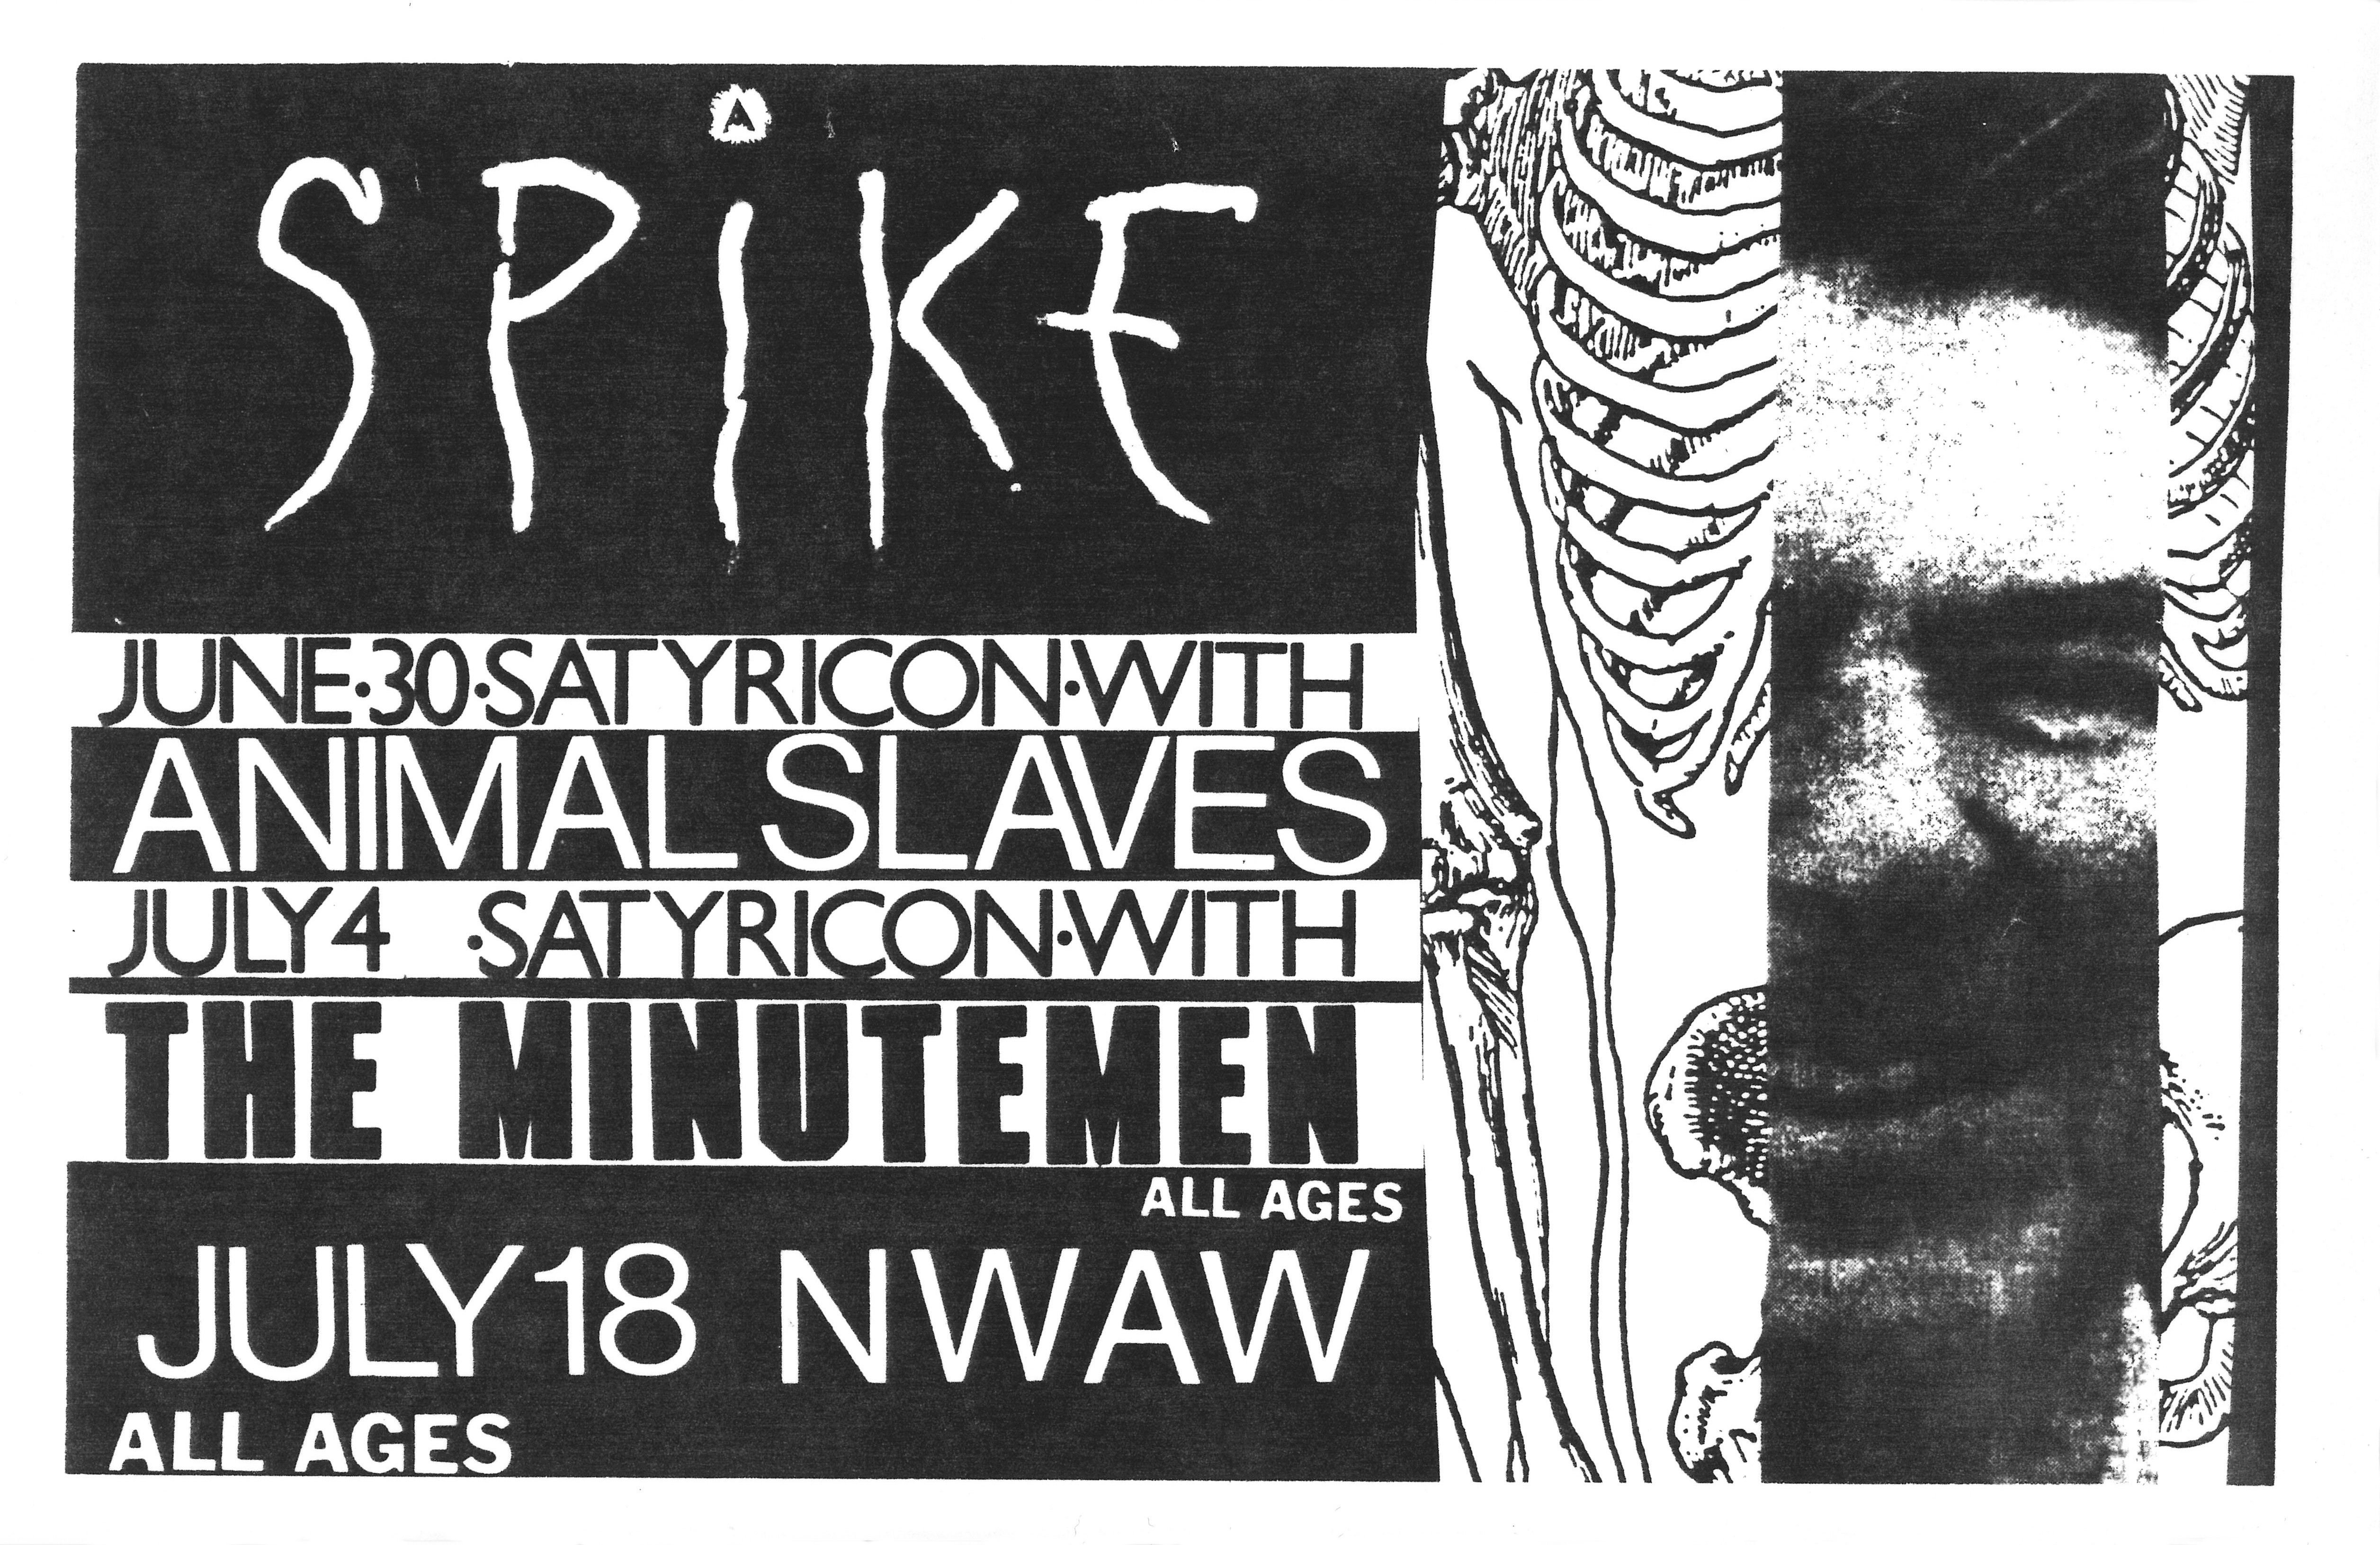 MXP-57.1 Spike 1984 Satyricon & NWAW Concert Poster